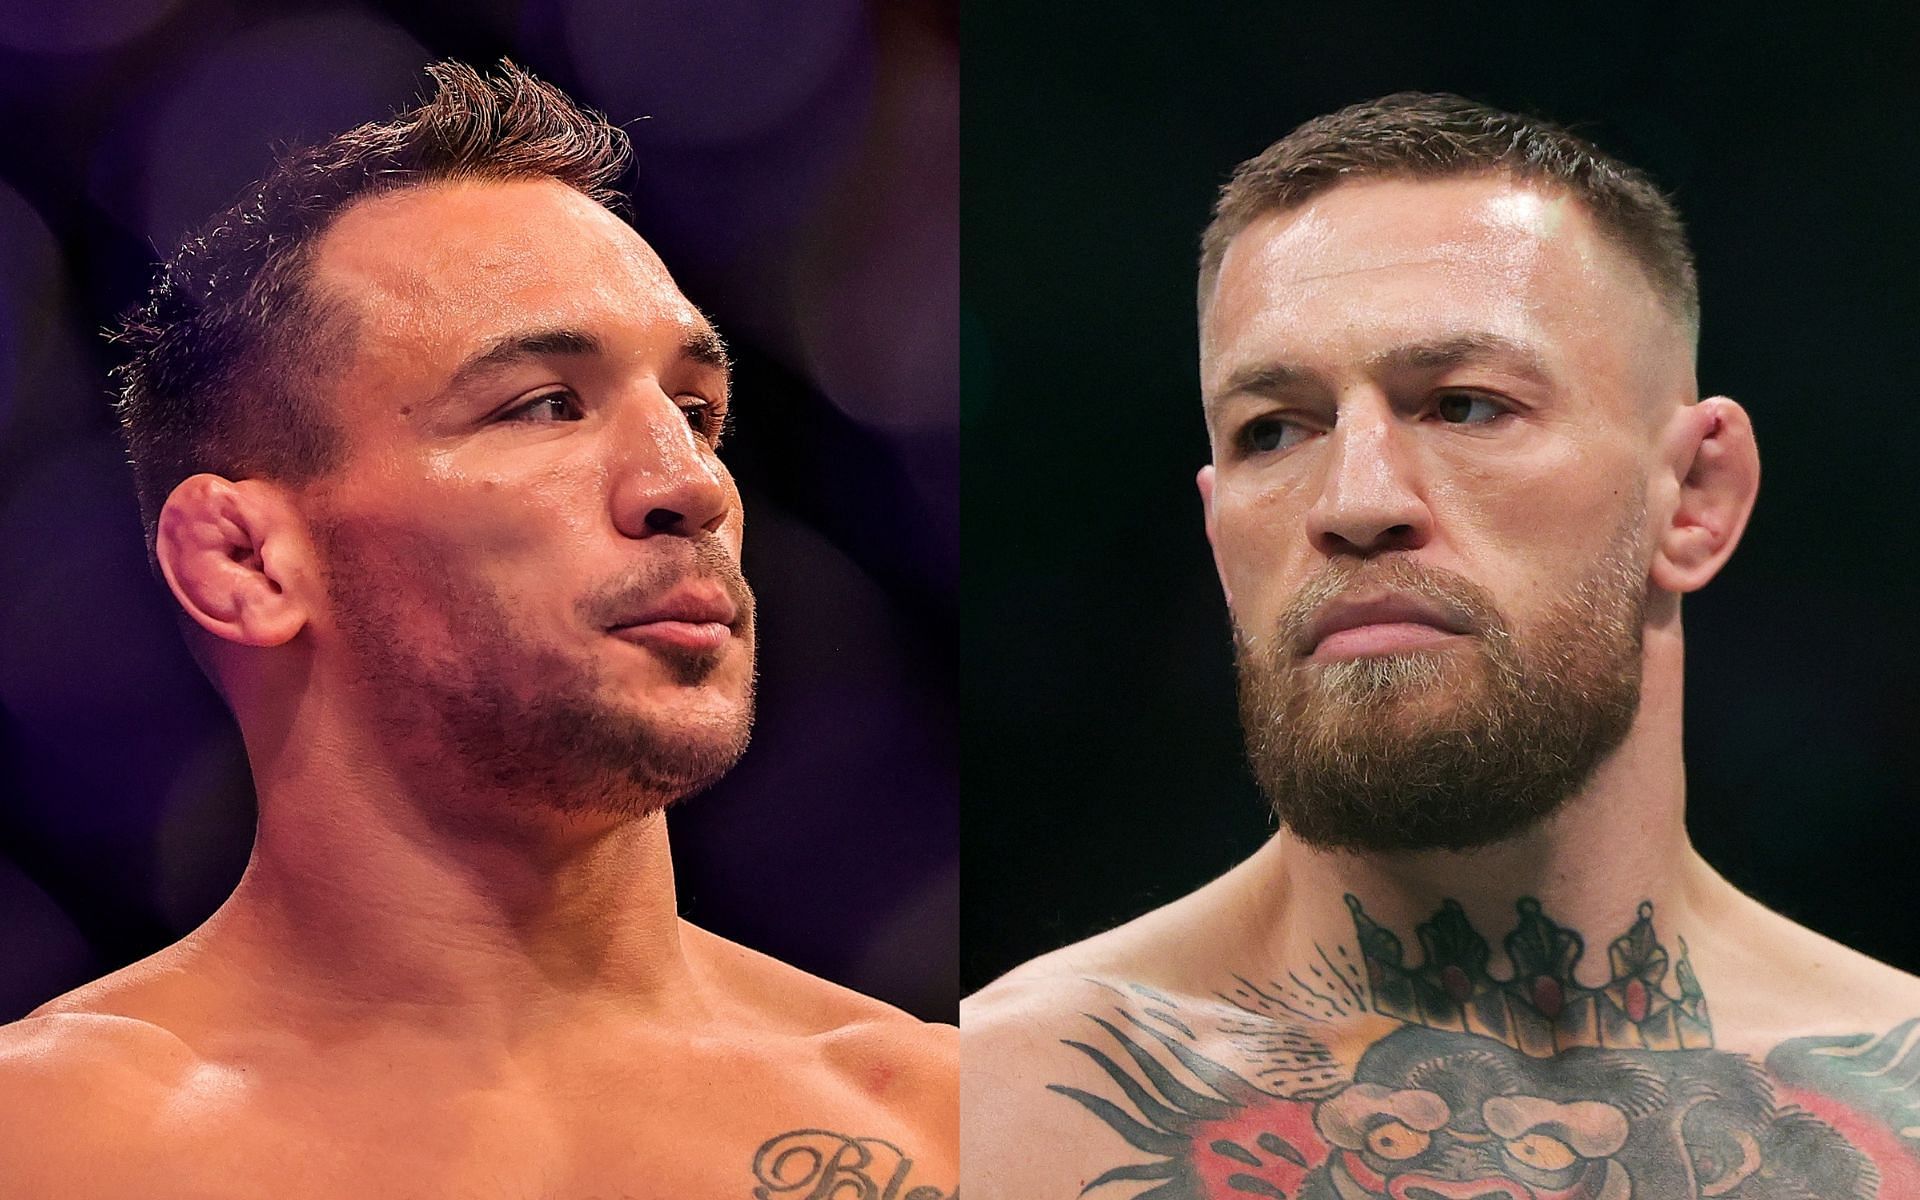 Michael Chandler (left) and Conor McGregor (right). [via Getty Images]